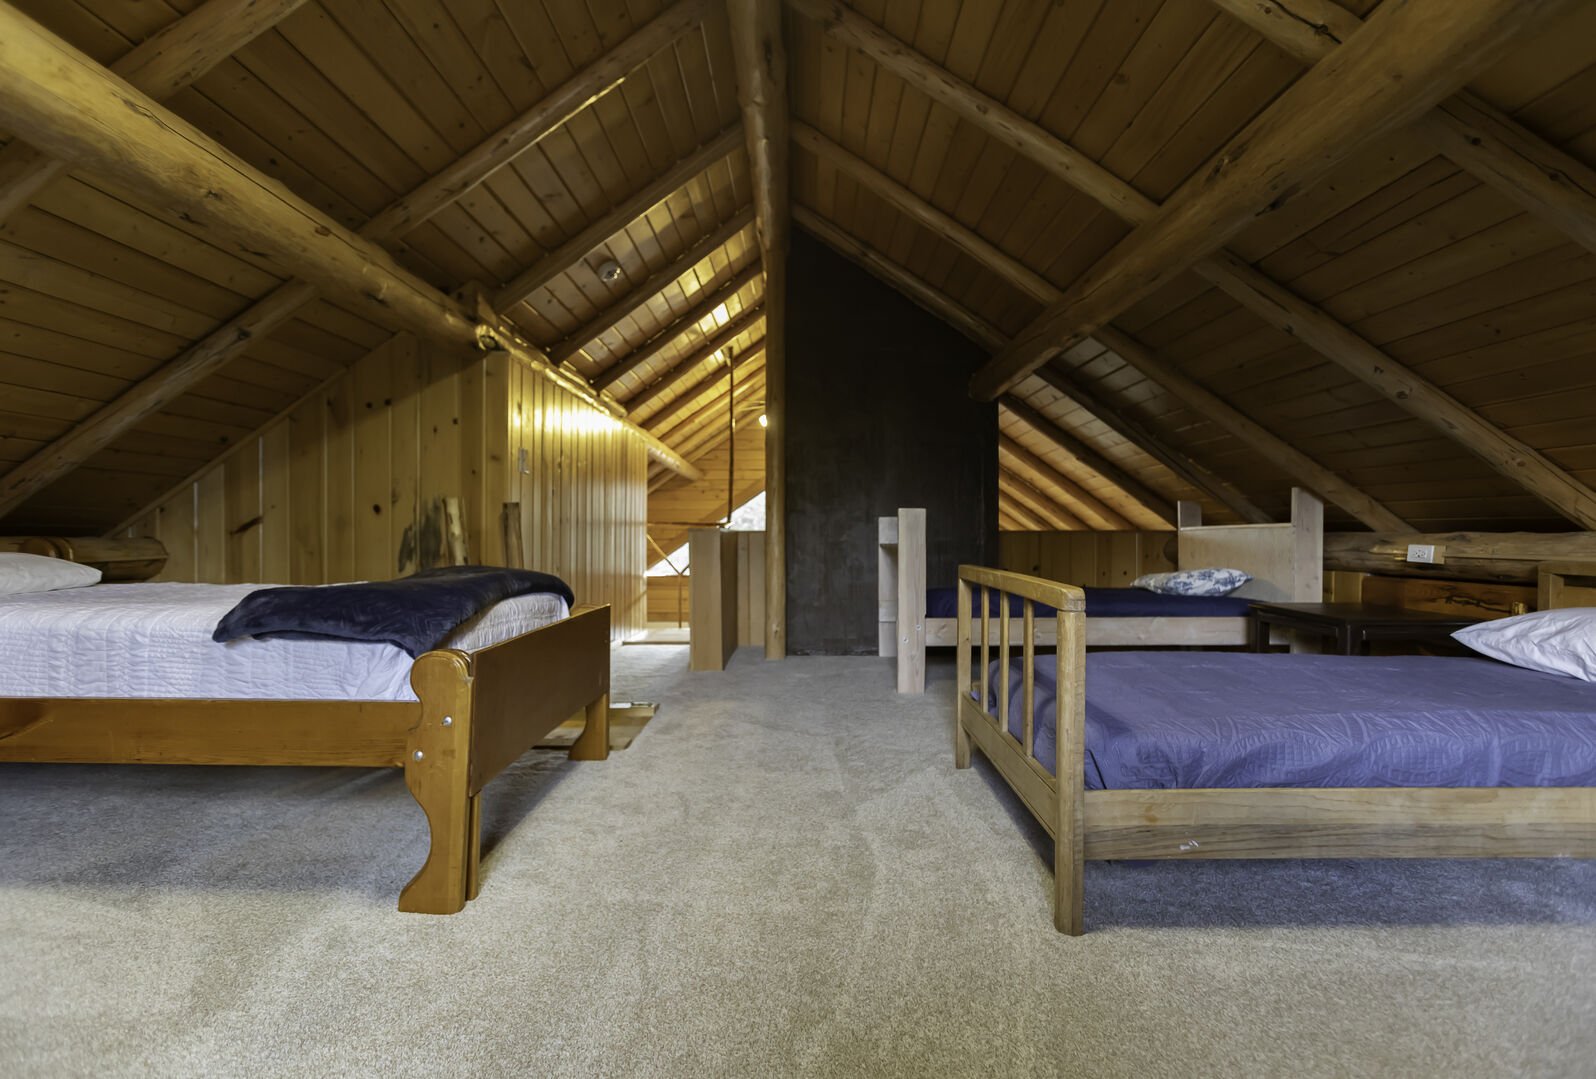 Buffalo Bliss - loft w/ 5 twin beds (considering this bedroom #5) accessible only by ladder or thru bedroom #4